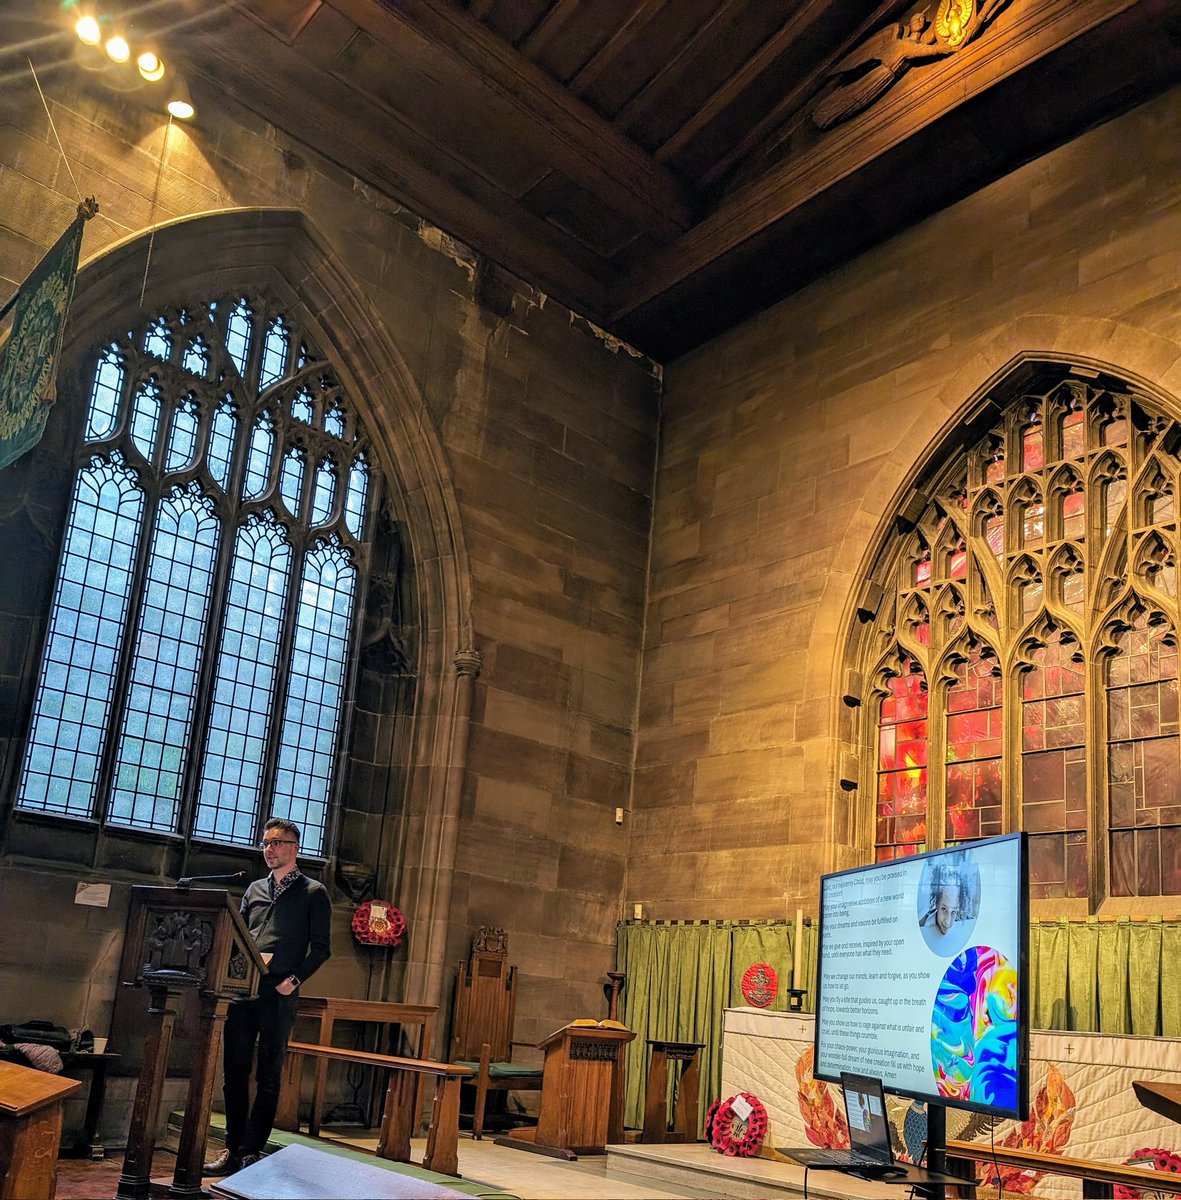 Another fascinating Cathedral Theological Conversation, this time with @grahamadams exploring God the Child. So much to think about and some excellent questions and reflections Podcast will be uploaded soon! @ManCathedral